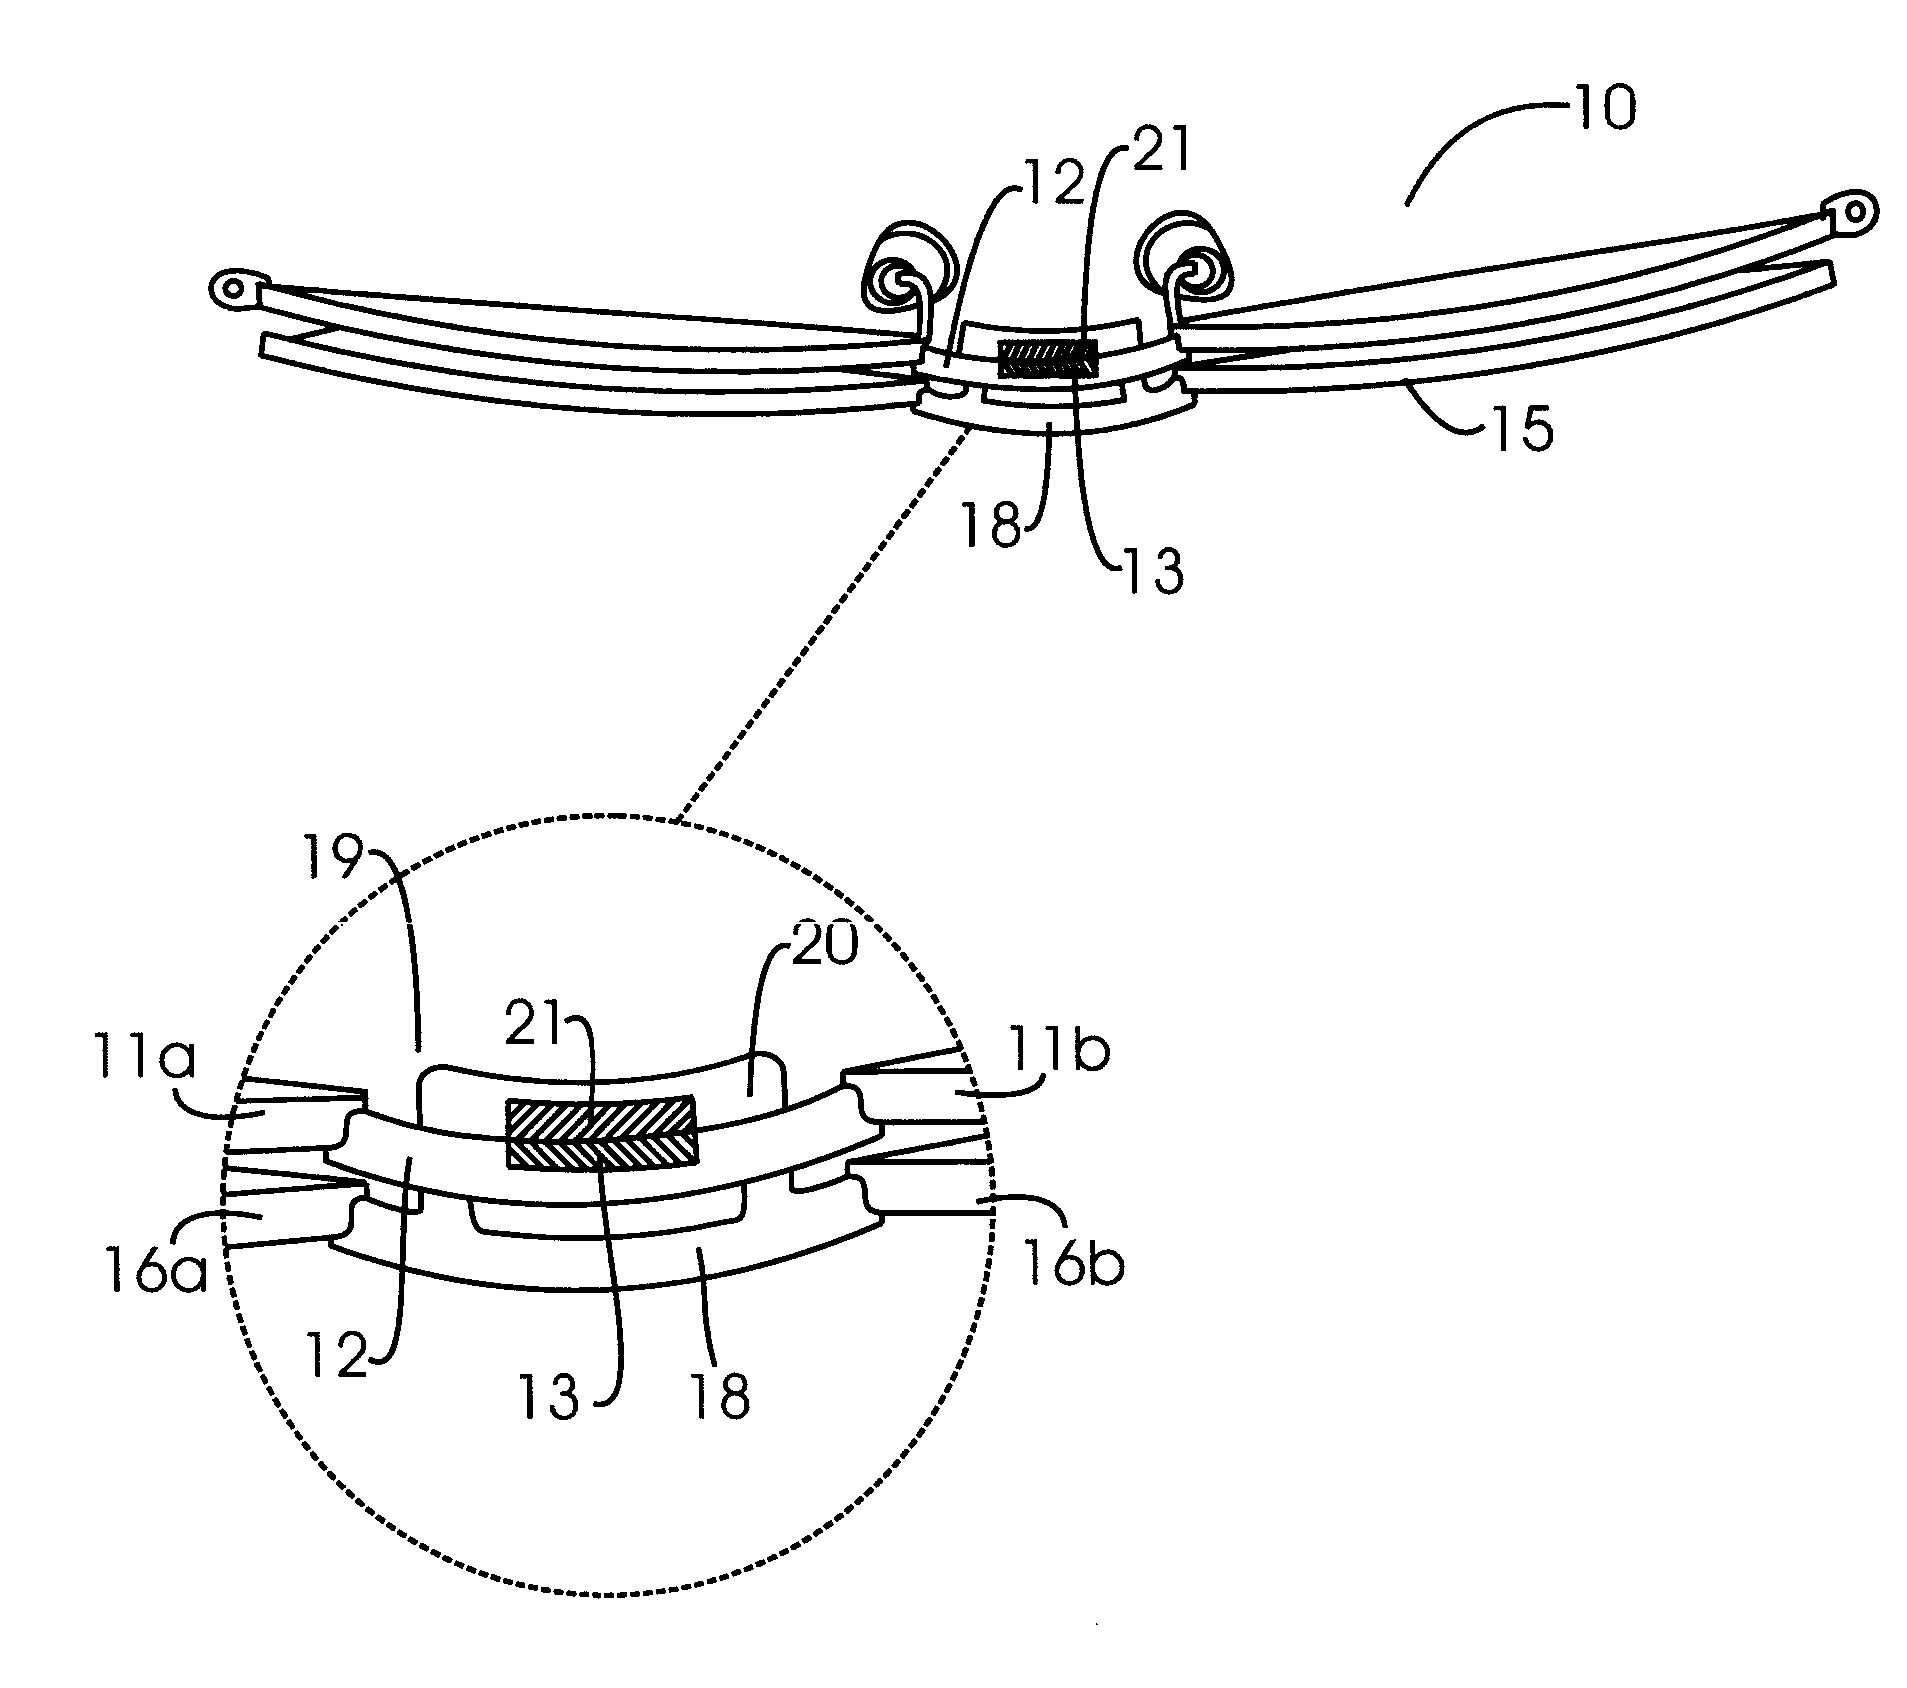 Eyeglasses having magnetically coupled primary lens frame and auxiliary lens frame